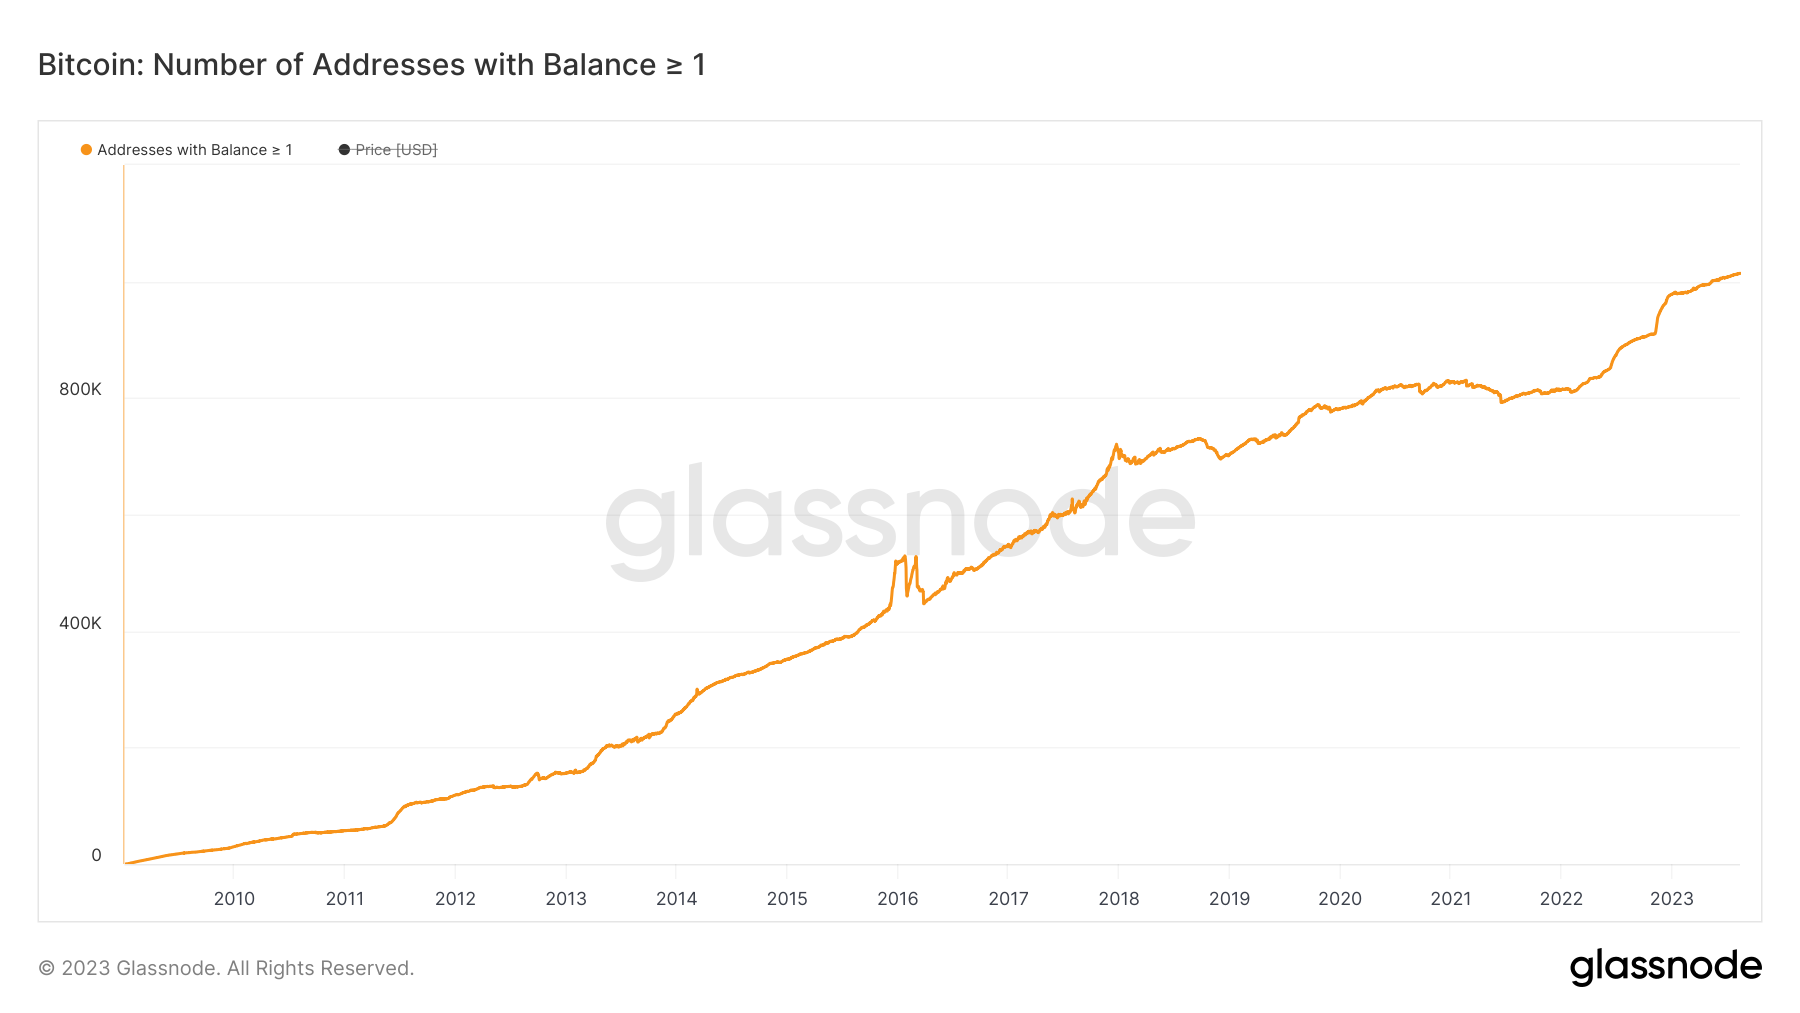 Growth in the number of bitcoin wallets holding at least one whole bitcoin. Source: Glassnode